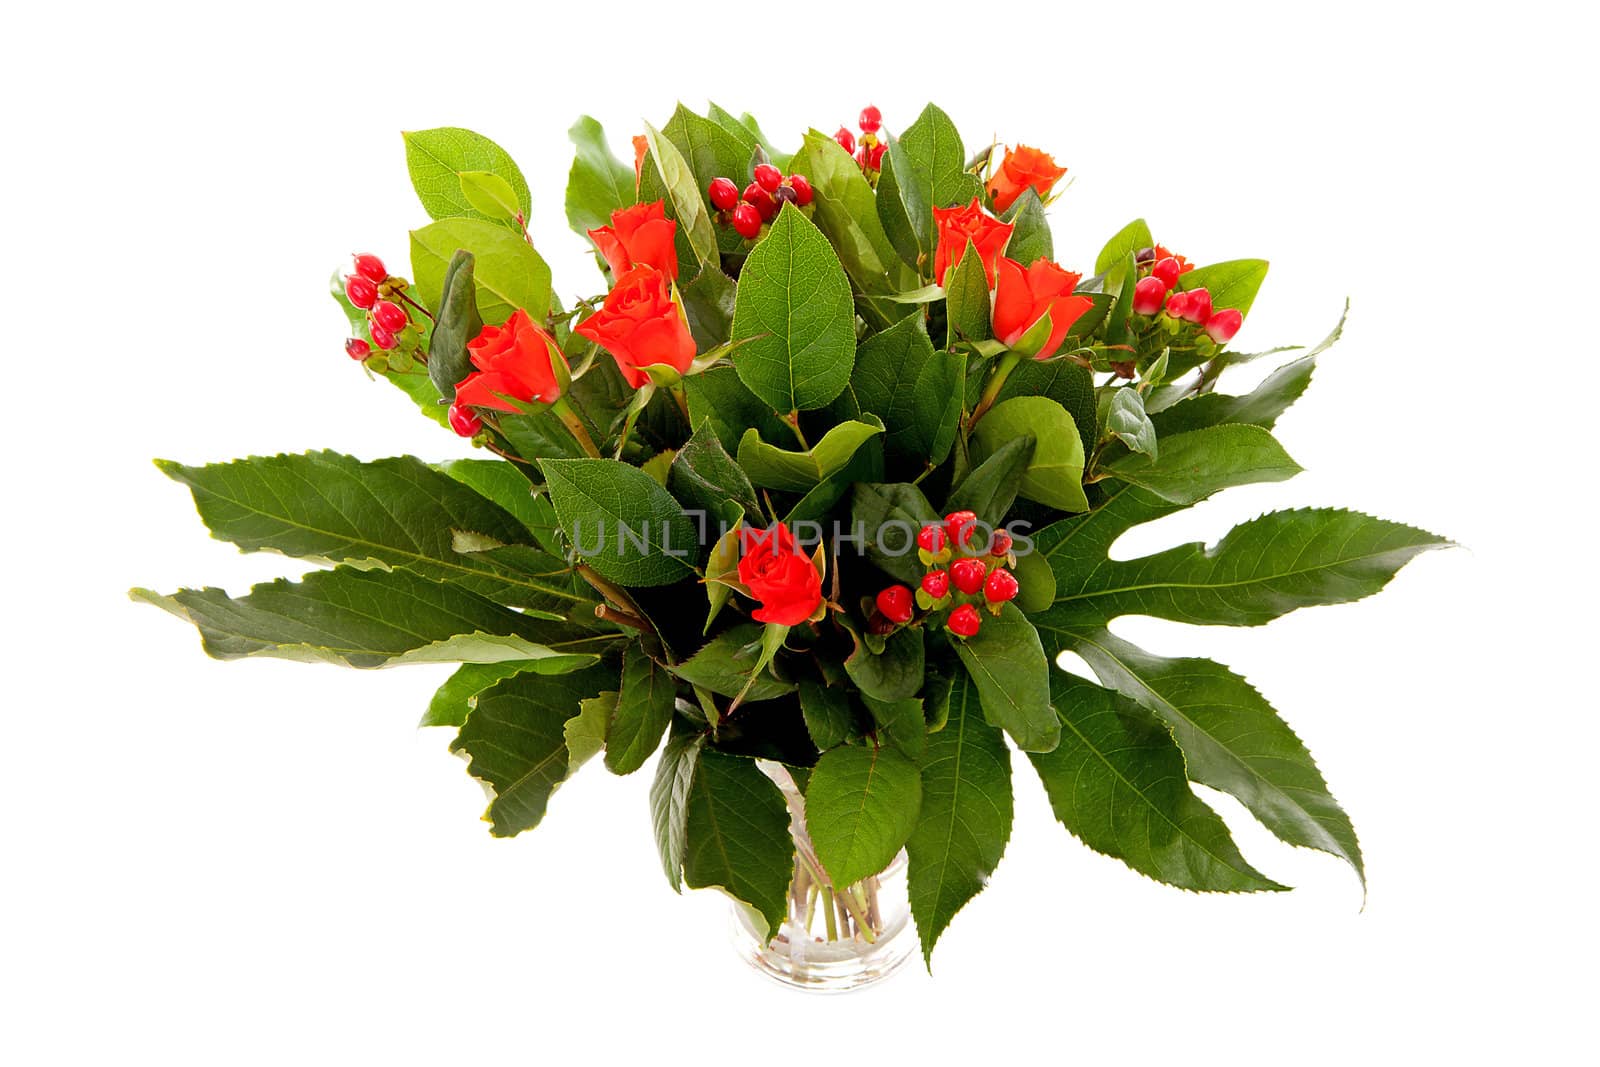 Bouquet of red flowers and leaves over white background